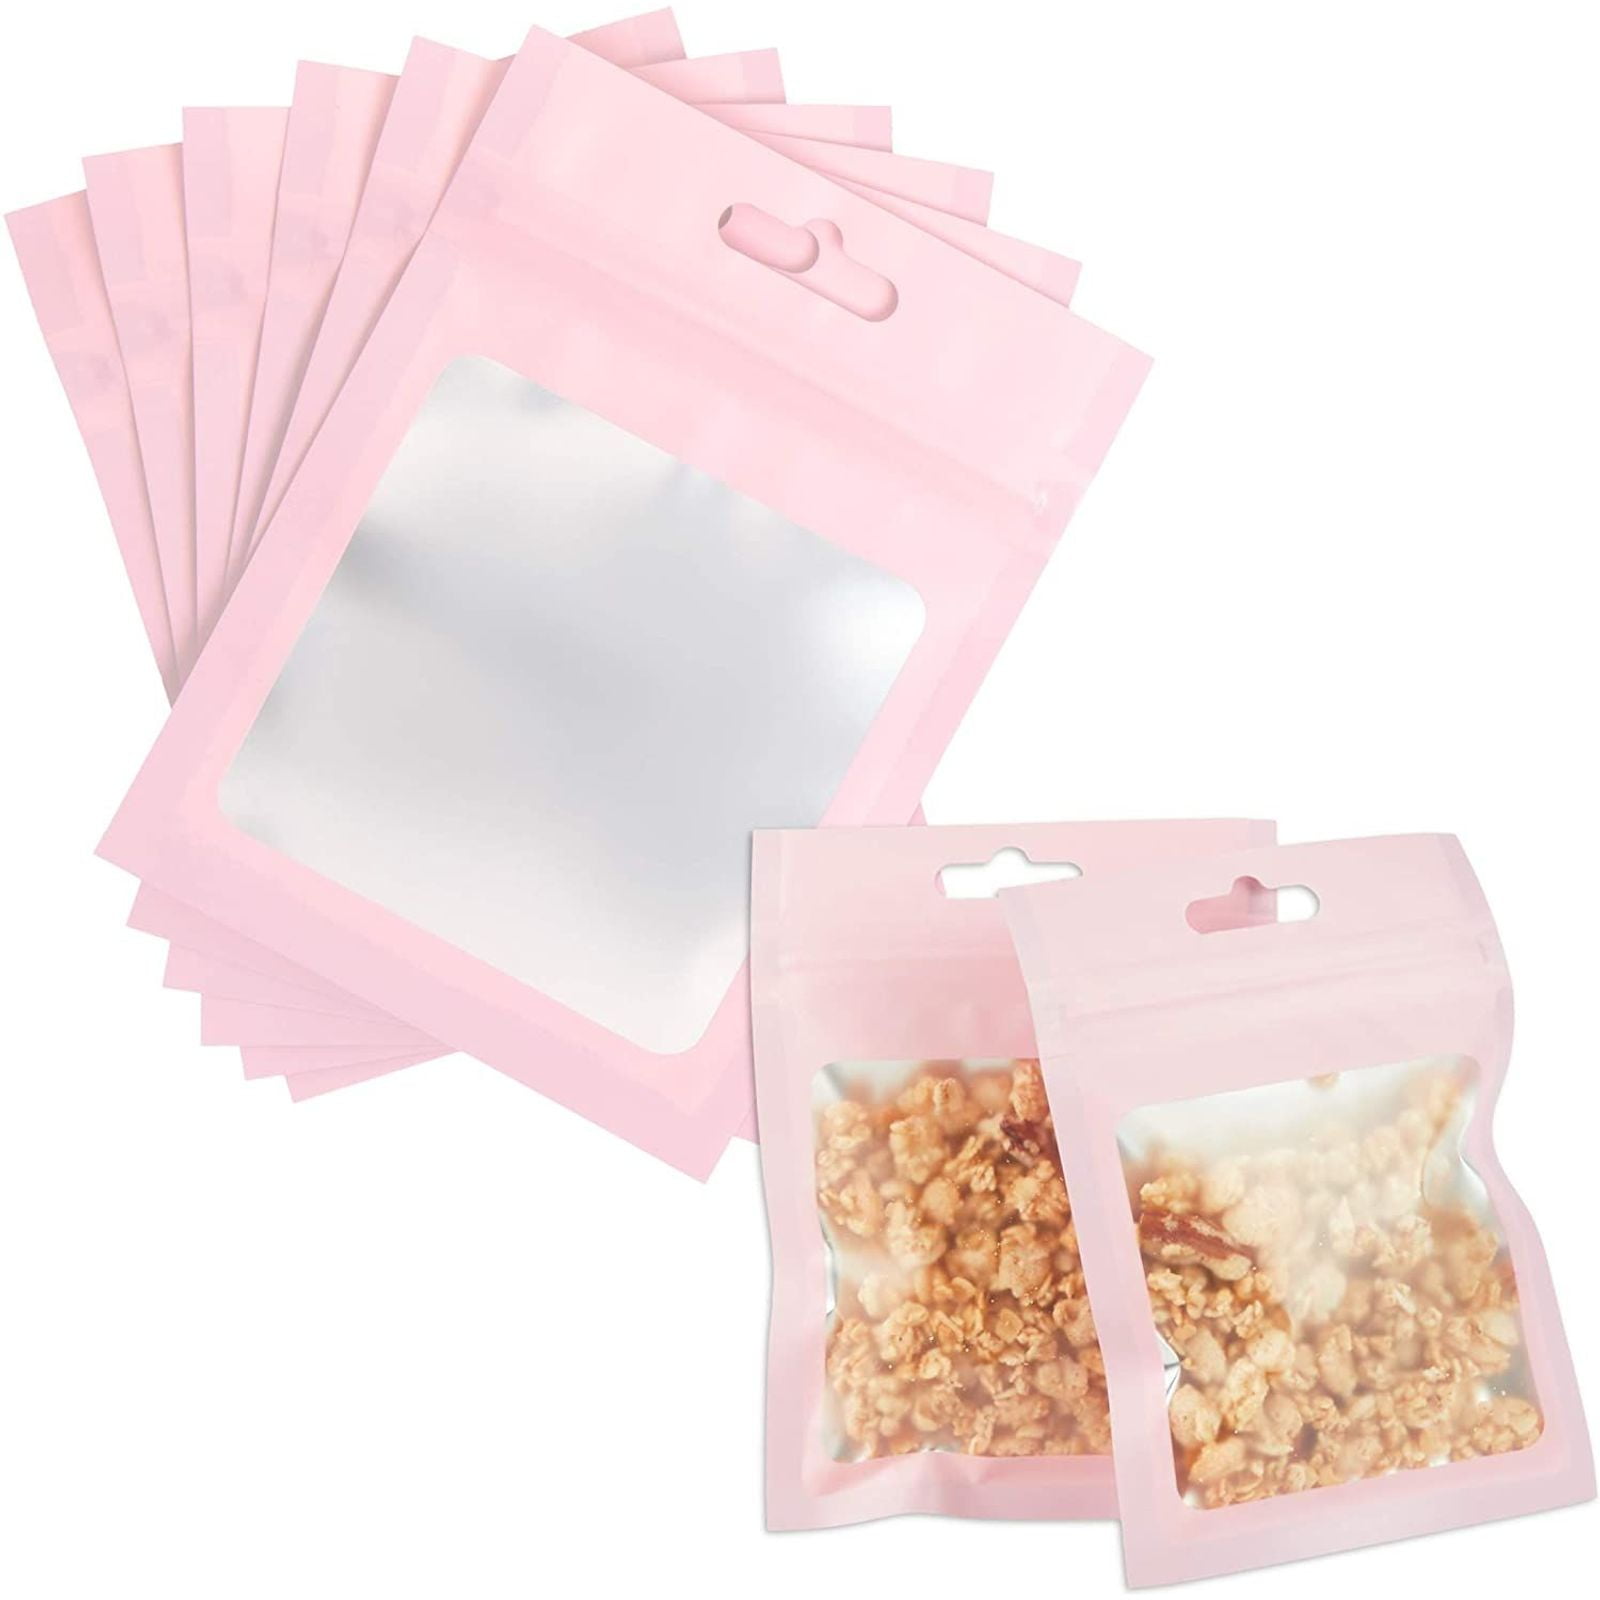 Food Storage Bags Resealable Food Bags Pack of 25 Mylar Smell Proof Bags 